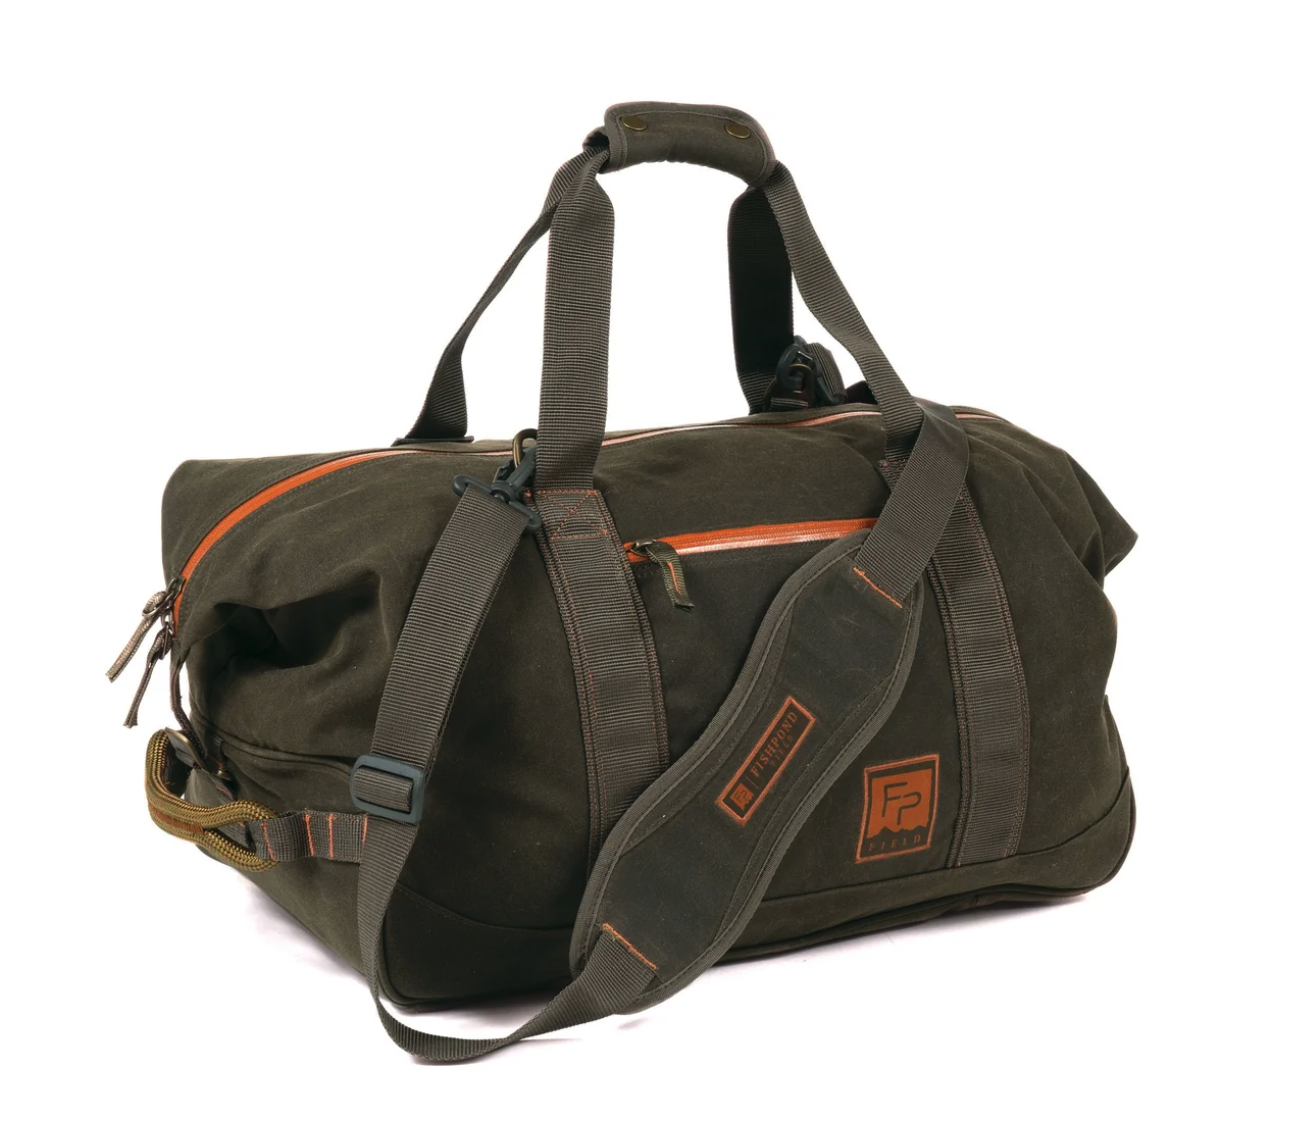 Buy Fishpond Jagged Basin Duffel online at TheFlyFishers.com